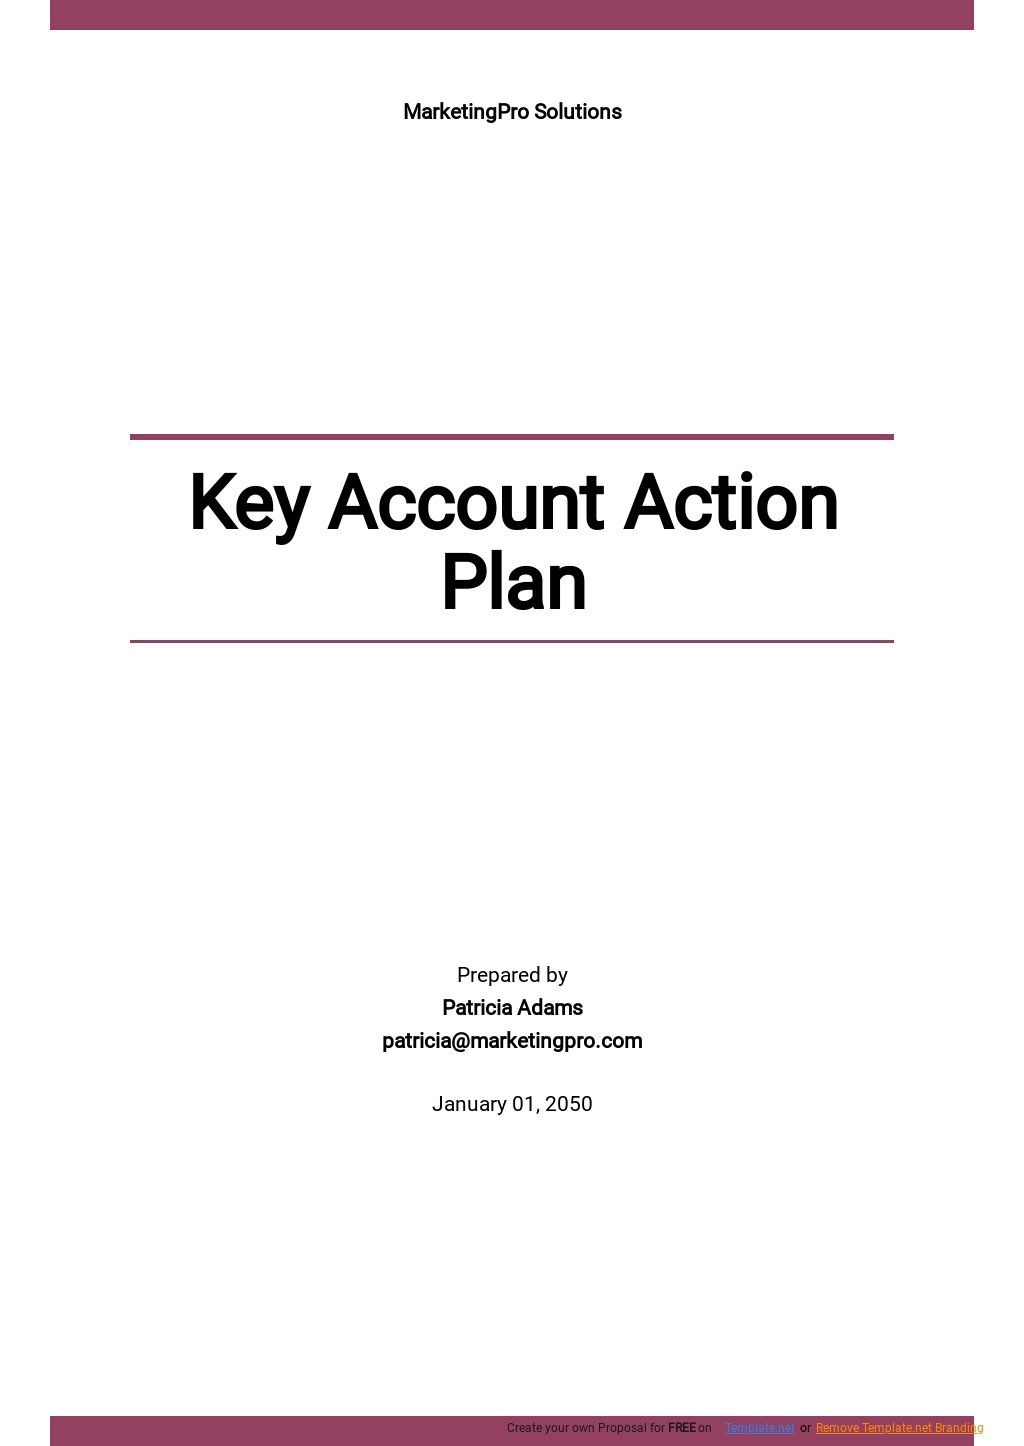 Key Account Action Plan Template